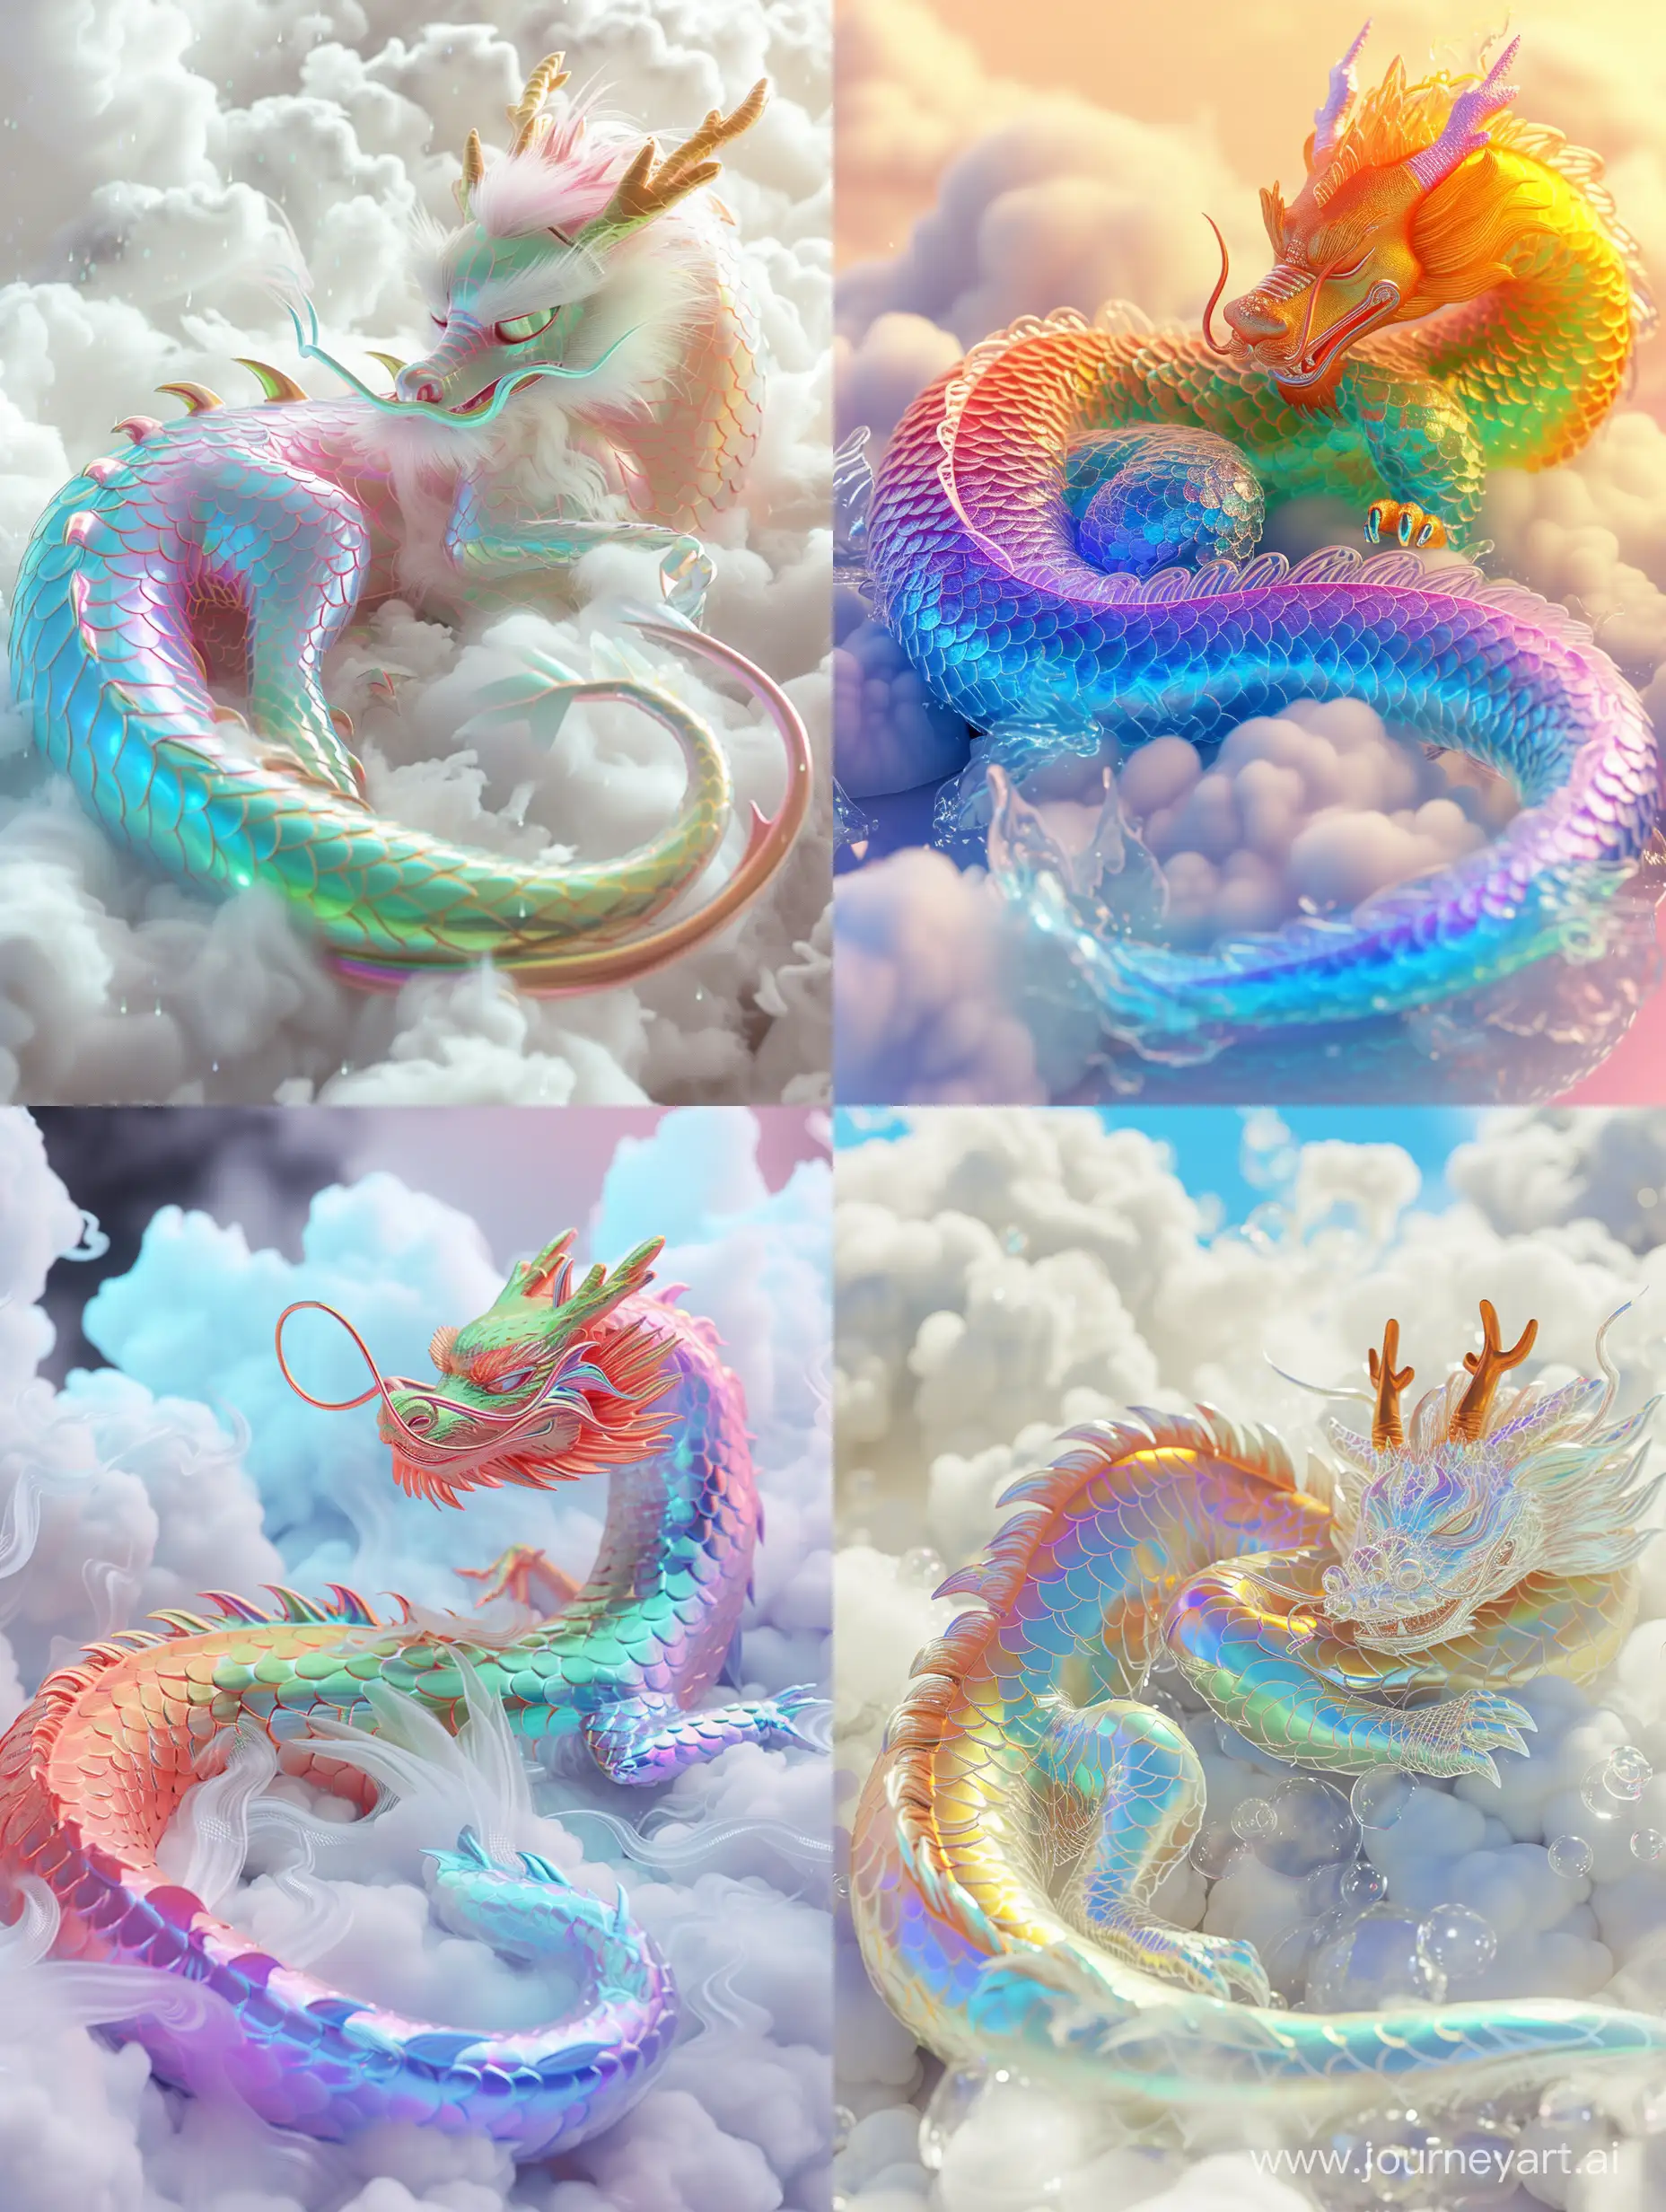 Translucent-Rainbow-Chinese-Dragon-Sleeping-on-Clouds-in-Anime-Aesthetic